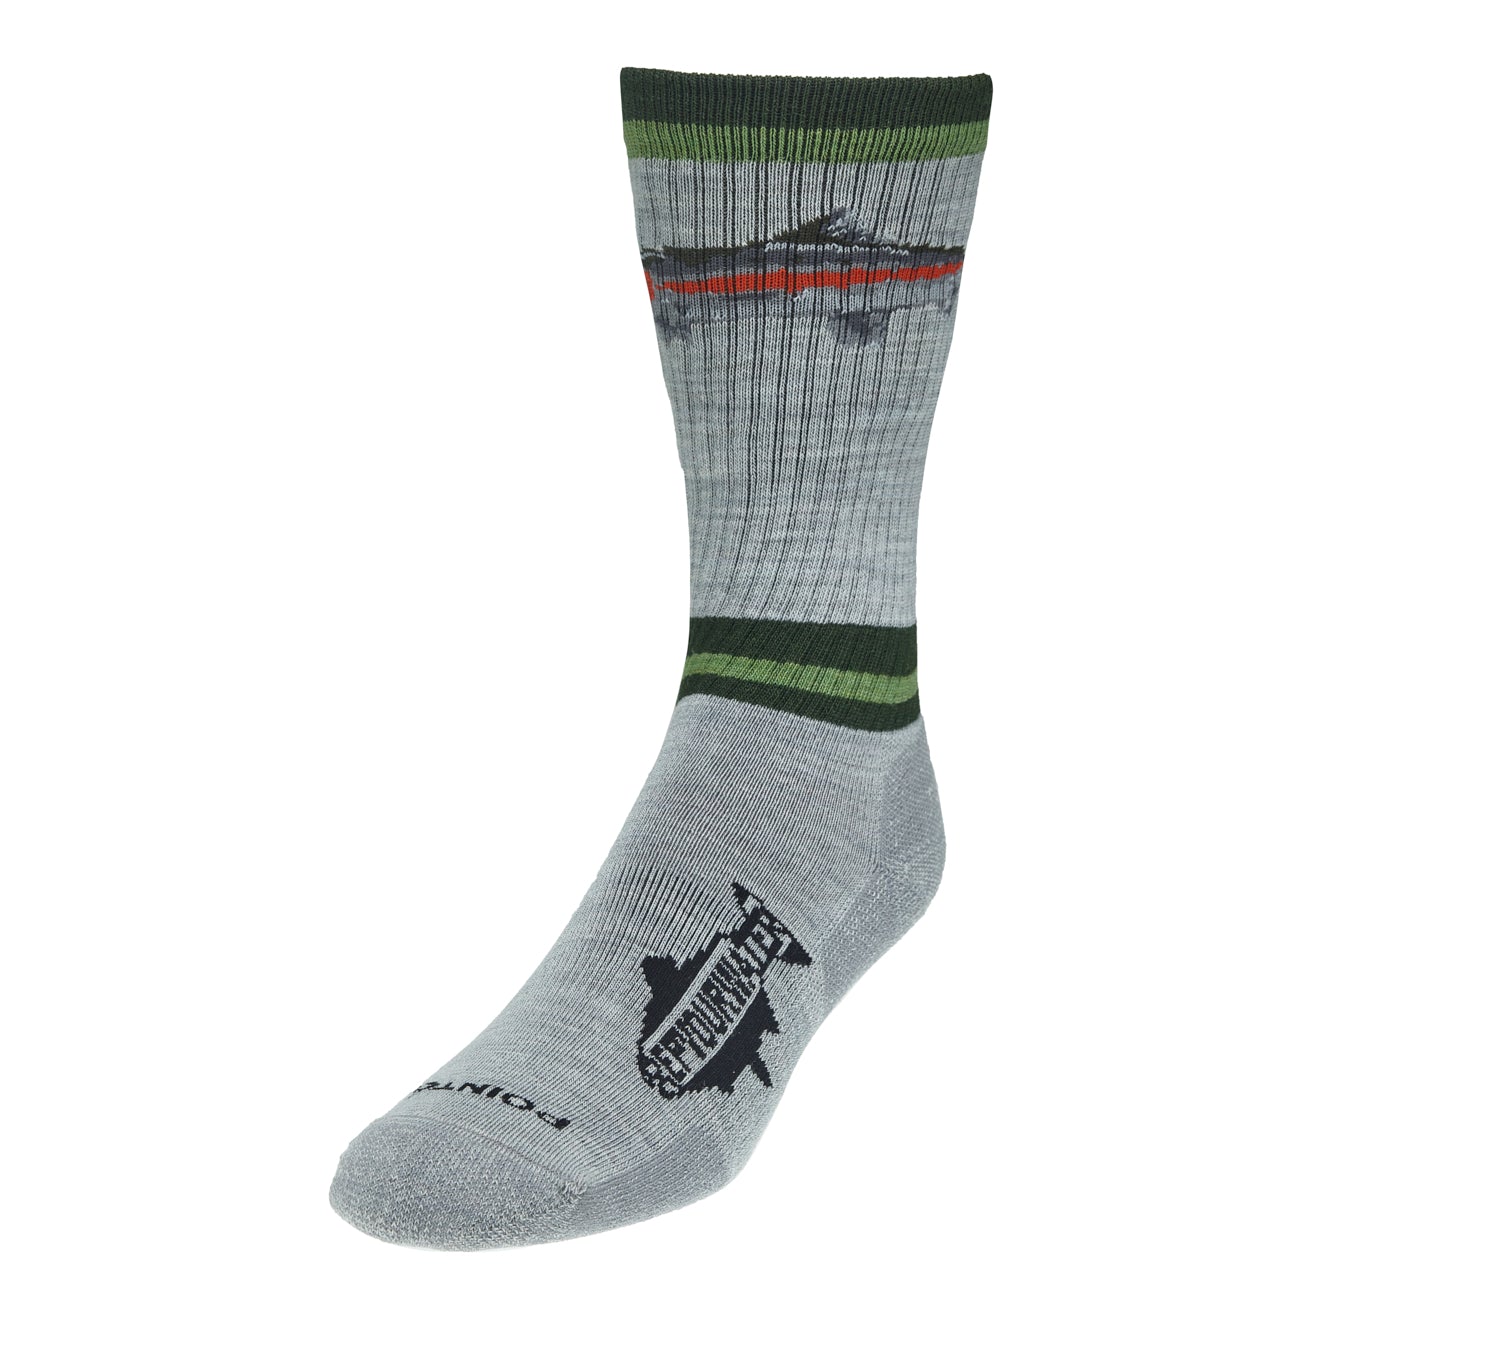 A light gray sock with green stripes and a rainbow trout on it.